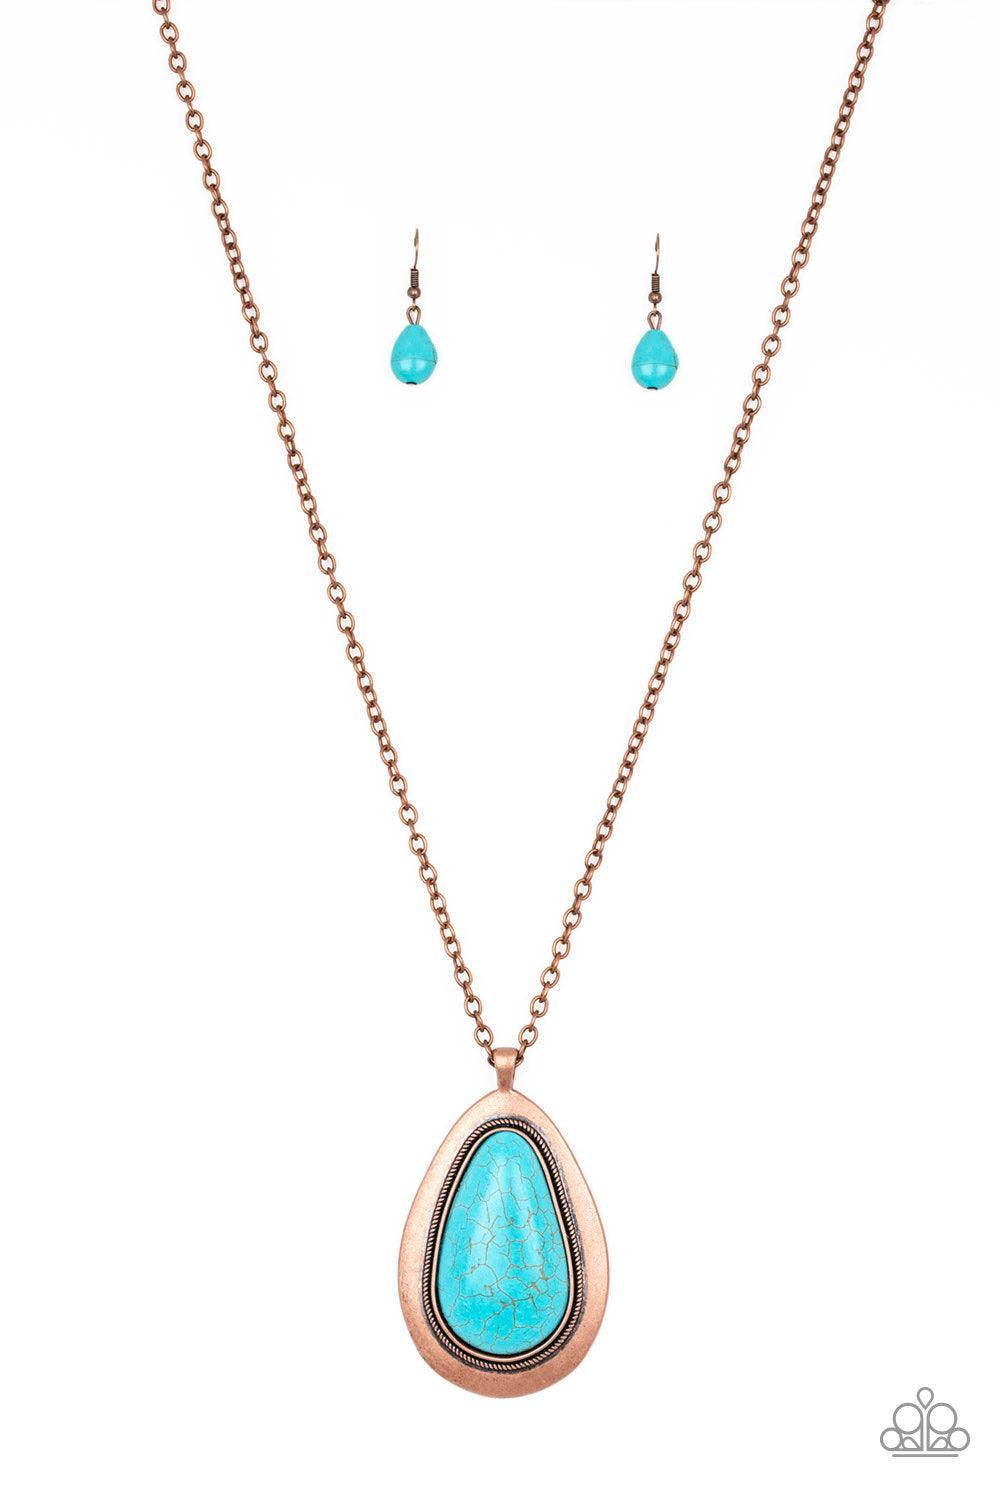 Paparazzi Accessories BADLAND To The Bone - Copper A dramatic turquoise stone teardrop is pressed into a glistening copper frame radiating with rustic patterns. The impressive pendant swings from the bottom of a lengthened copper chain for a seasonal look